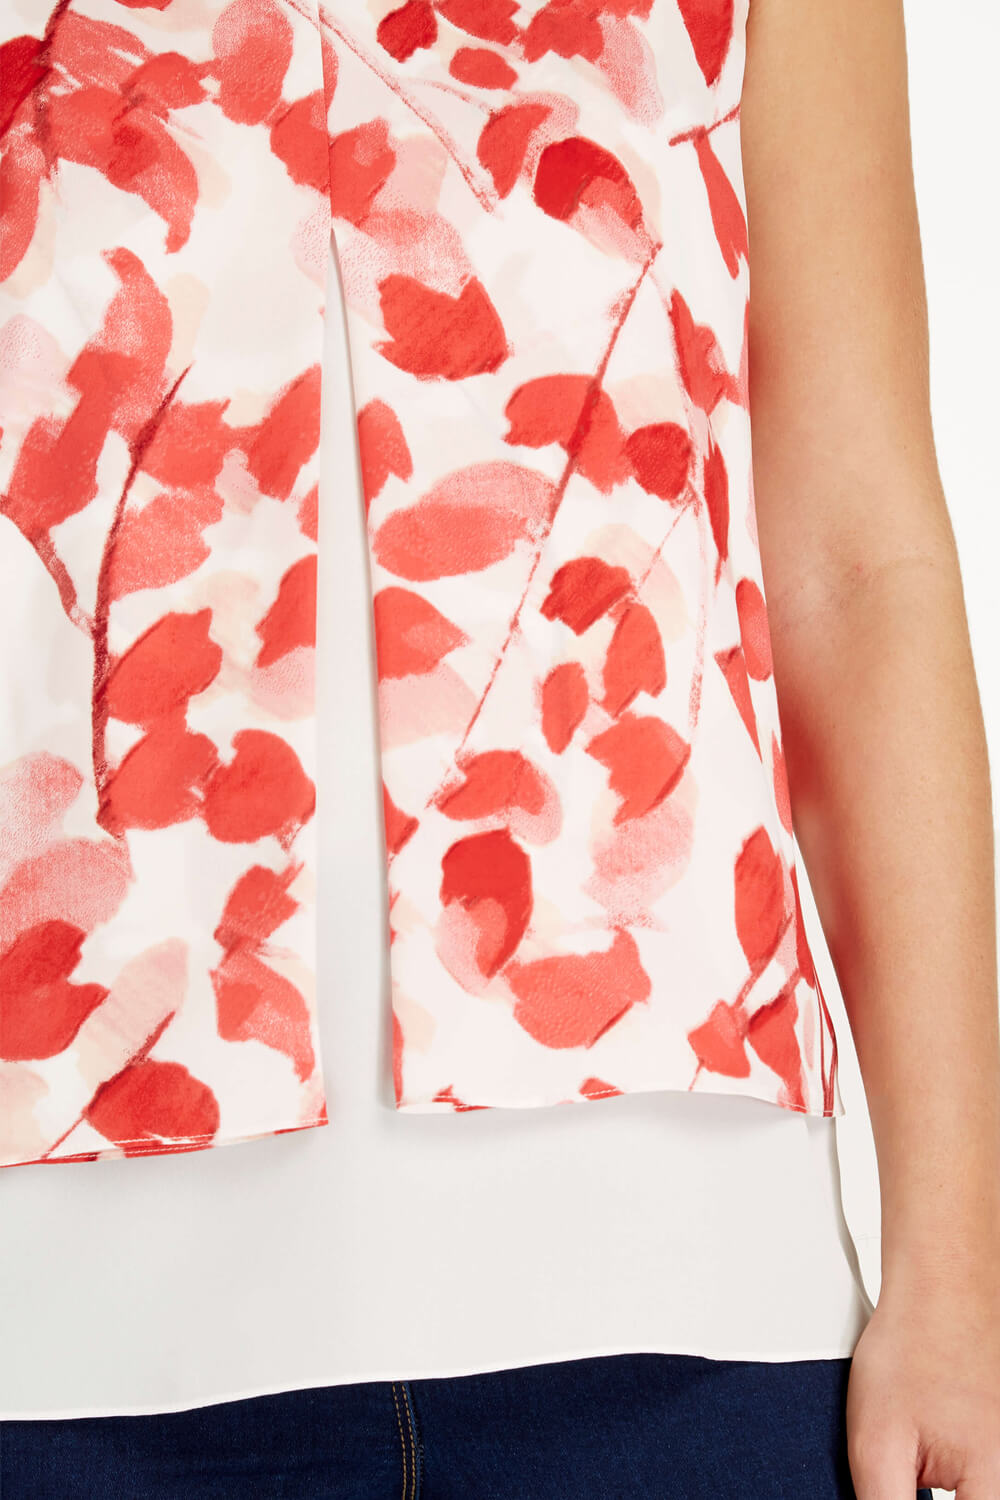 Red Floral Print Pleat Layered Top, Image 3 of 4